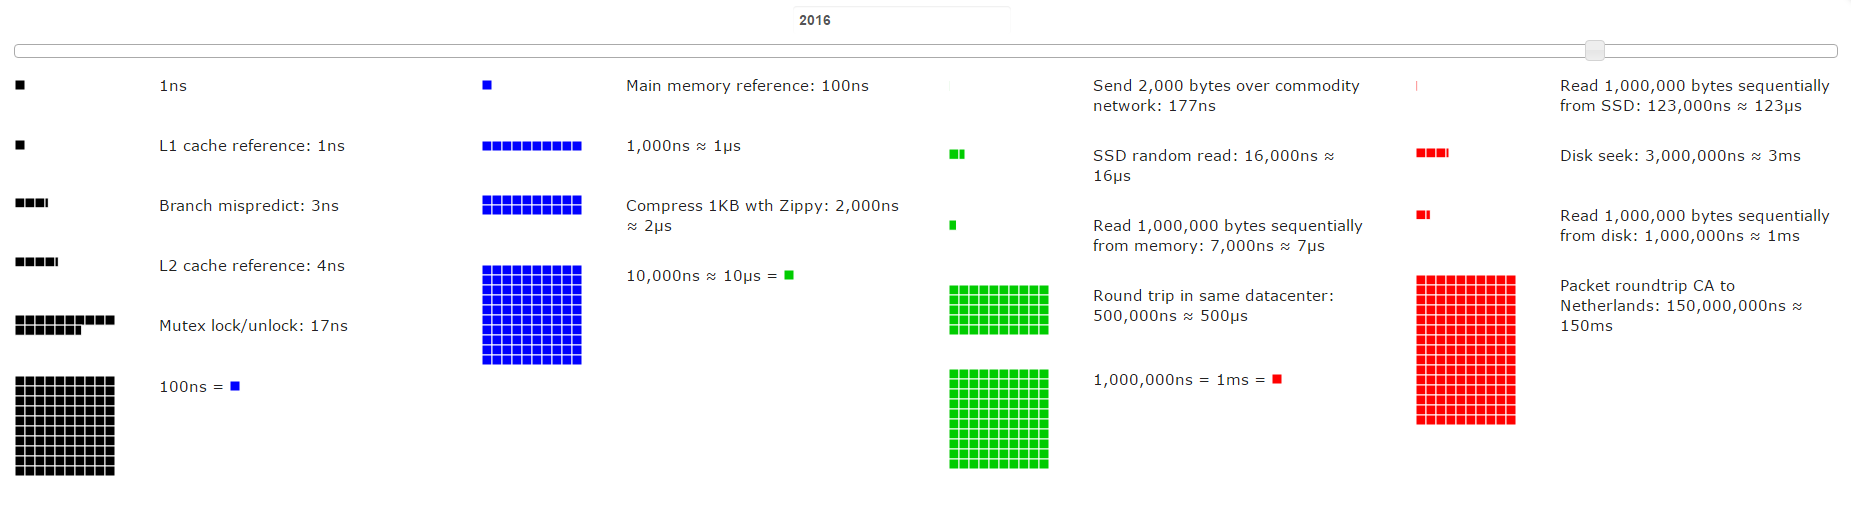 Latency Numbers Every Programmer Should Know 2016